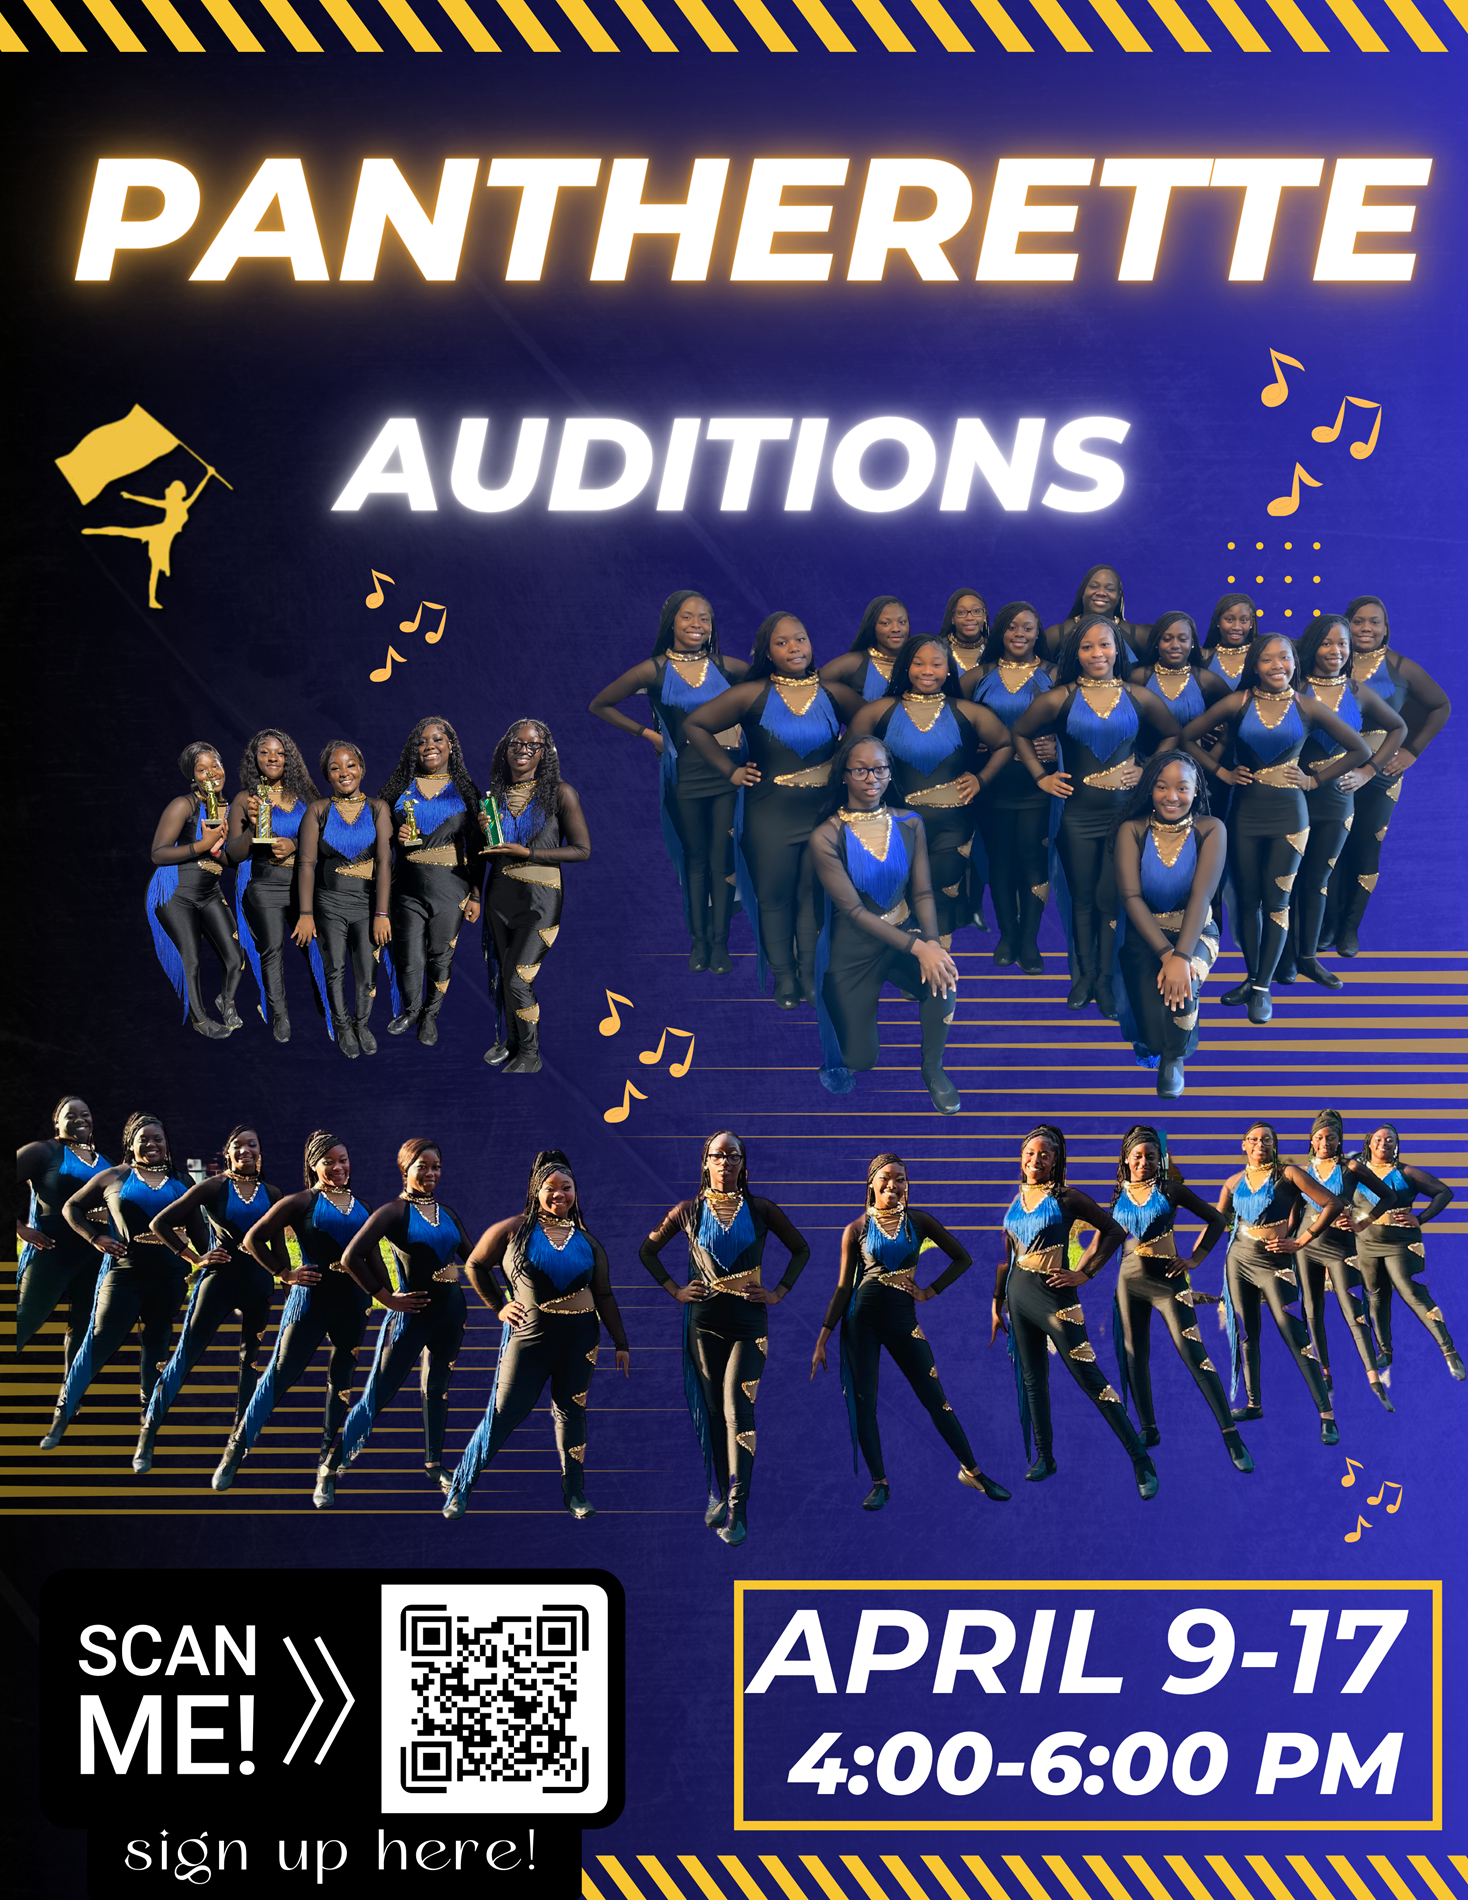 PANTHERETTE AUDITIONS FLYER